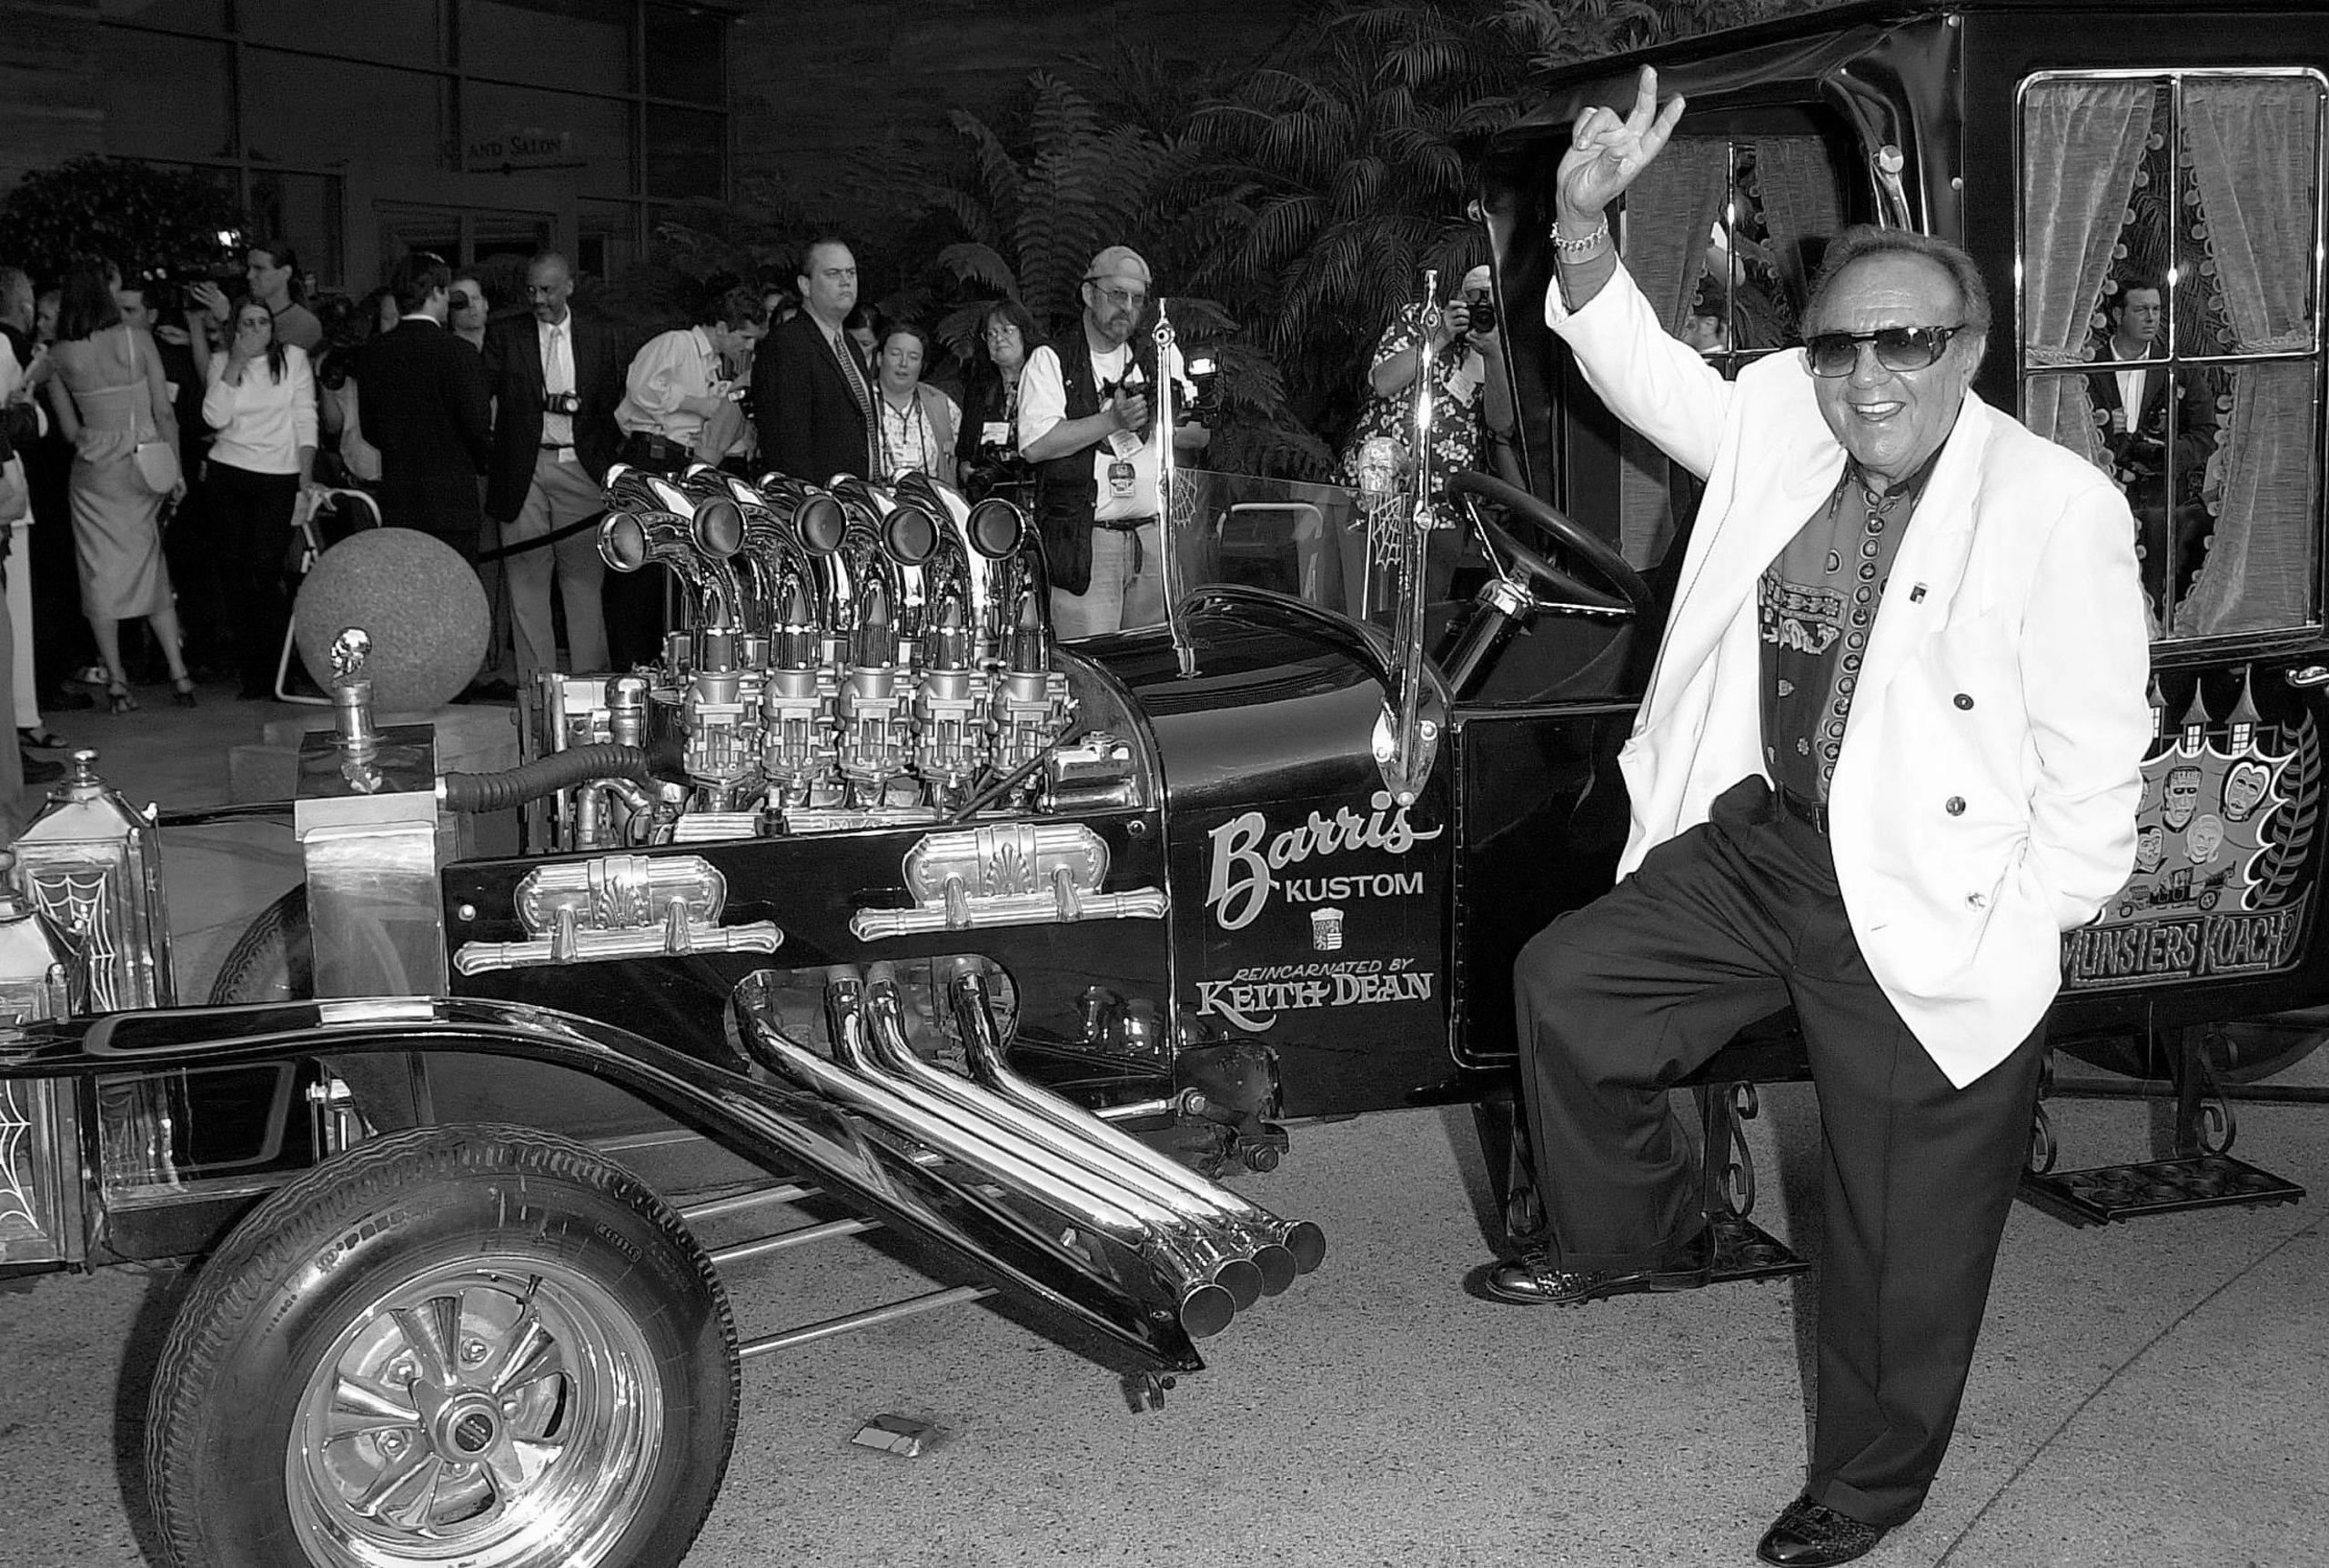 builder George Barris with his munster koach hot rod creation